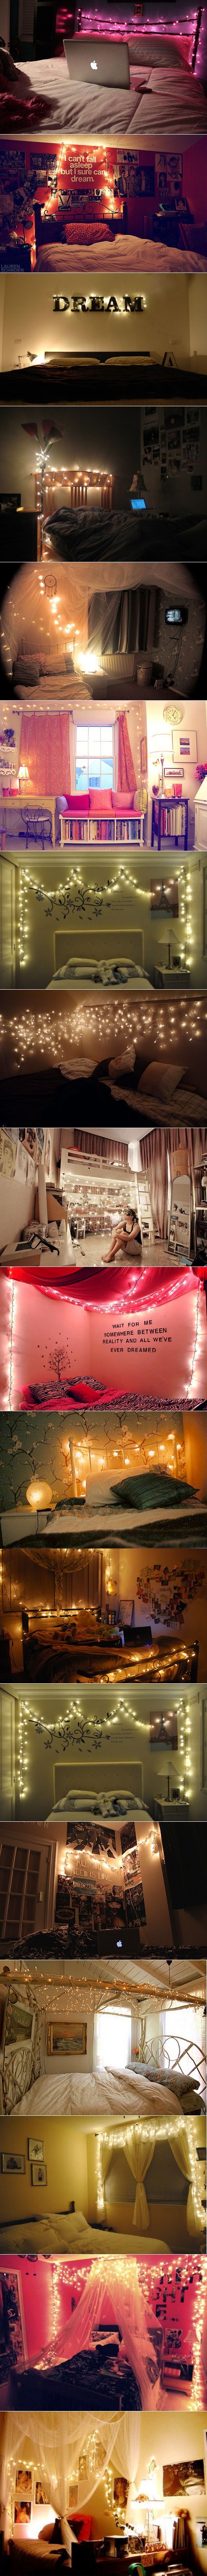 Apparently all perfect teen rooms have christmas lights and inspiring quotes